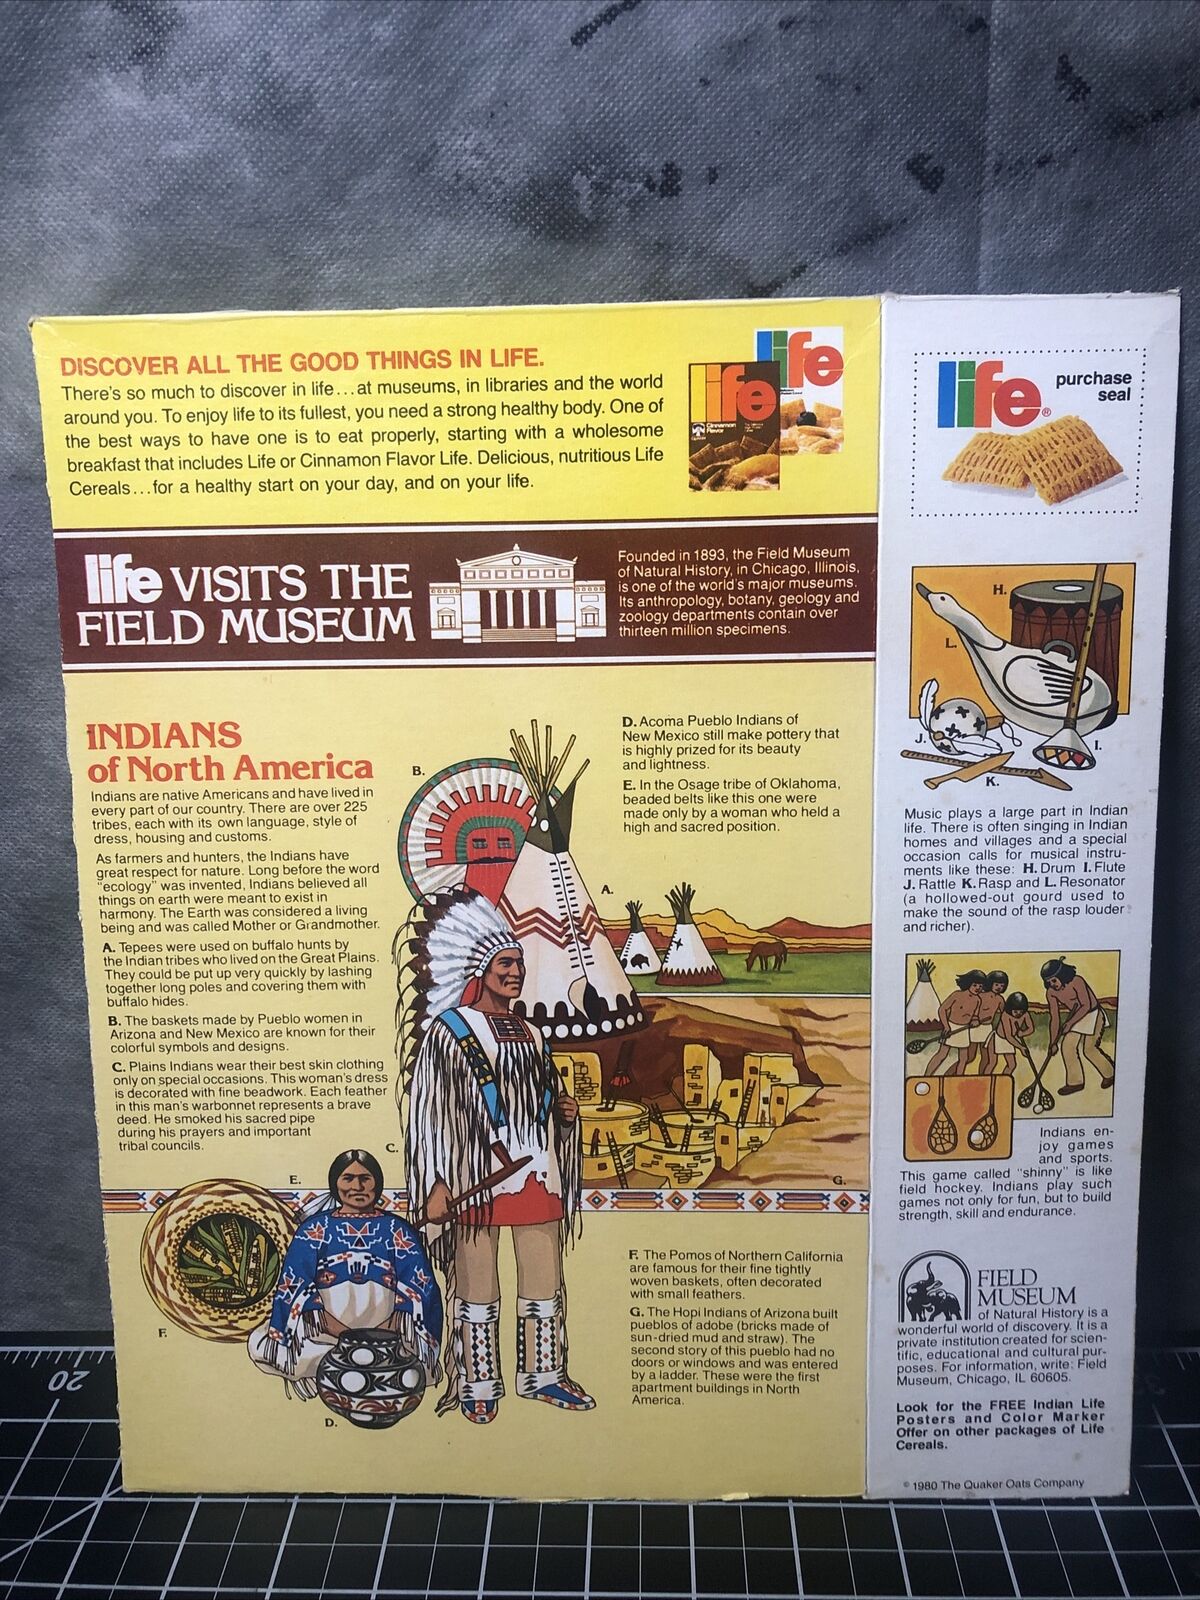 1980 Vintage Life Cereal Box Native American Indians Quaker Oats 80s Advertising